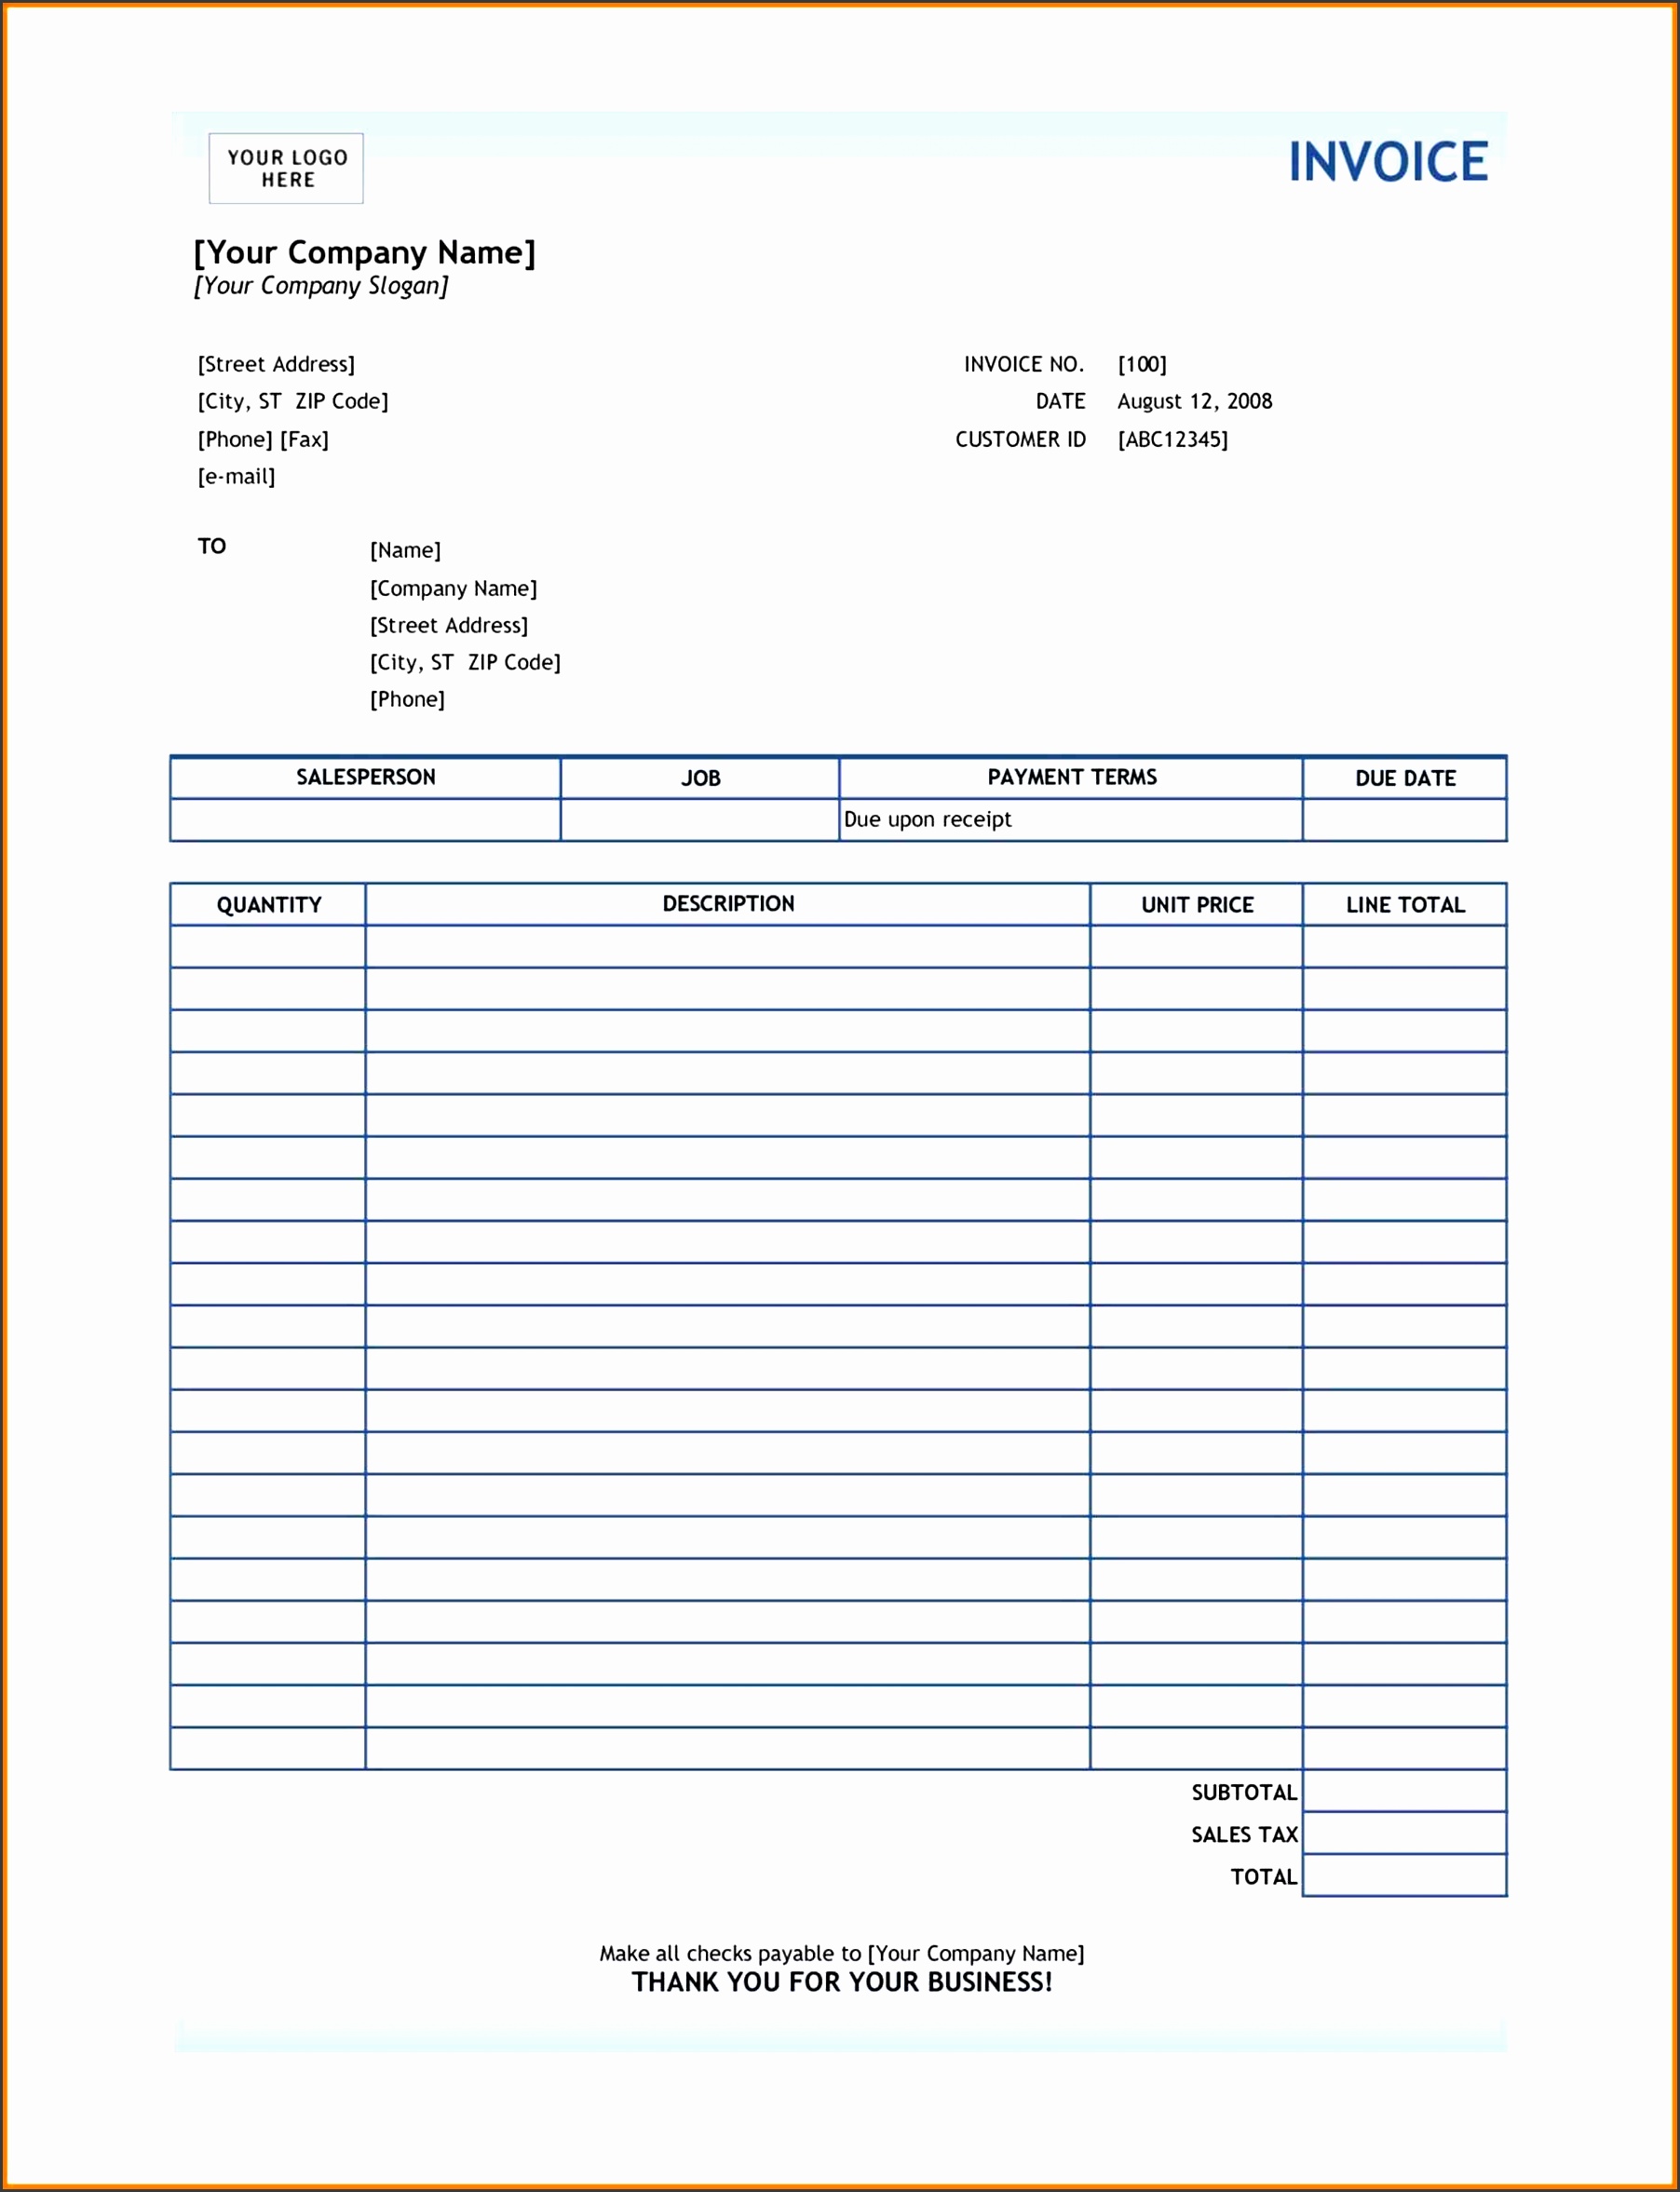 contractor invoice template xls